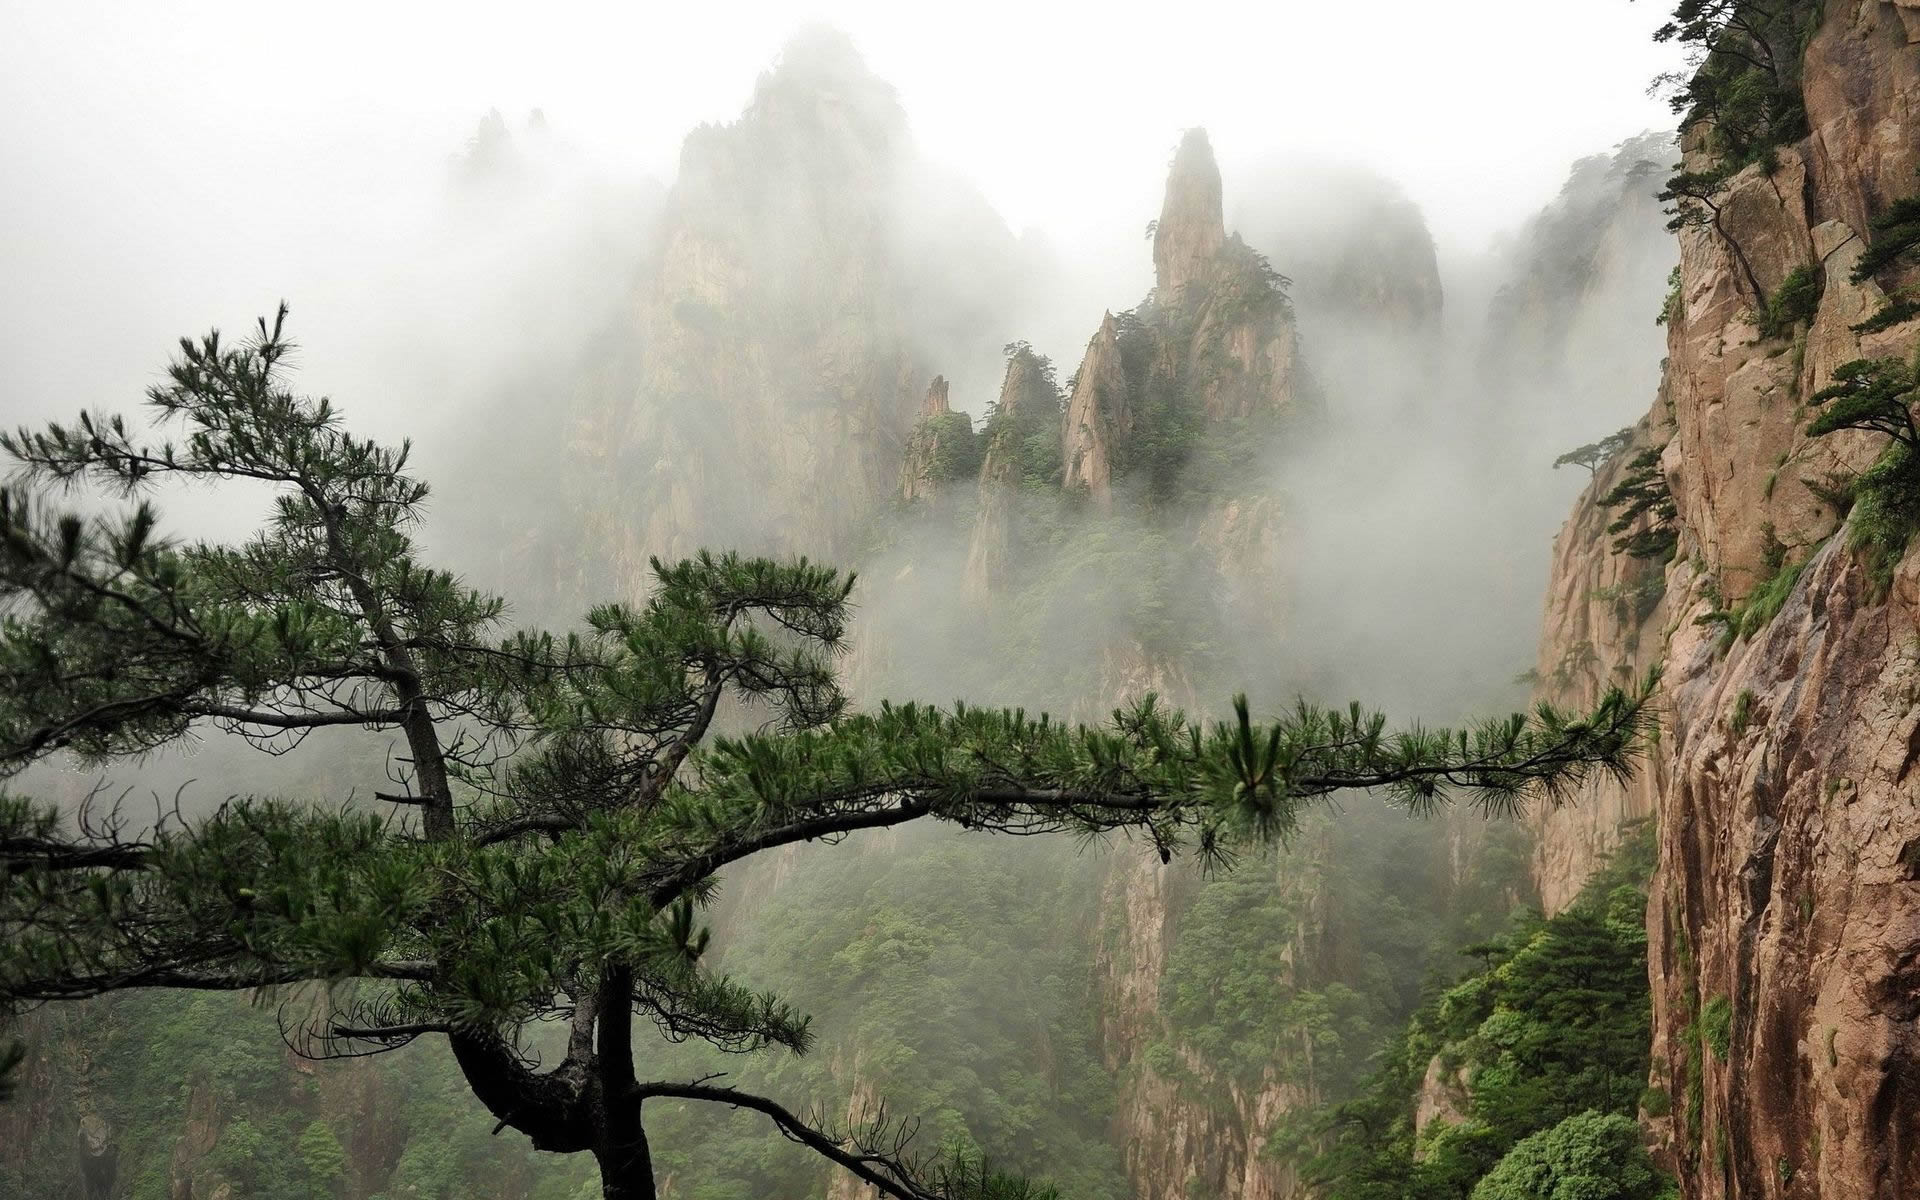 A misty mountain range with trees in the foreground. - Nature